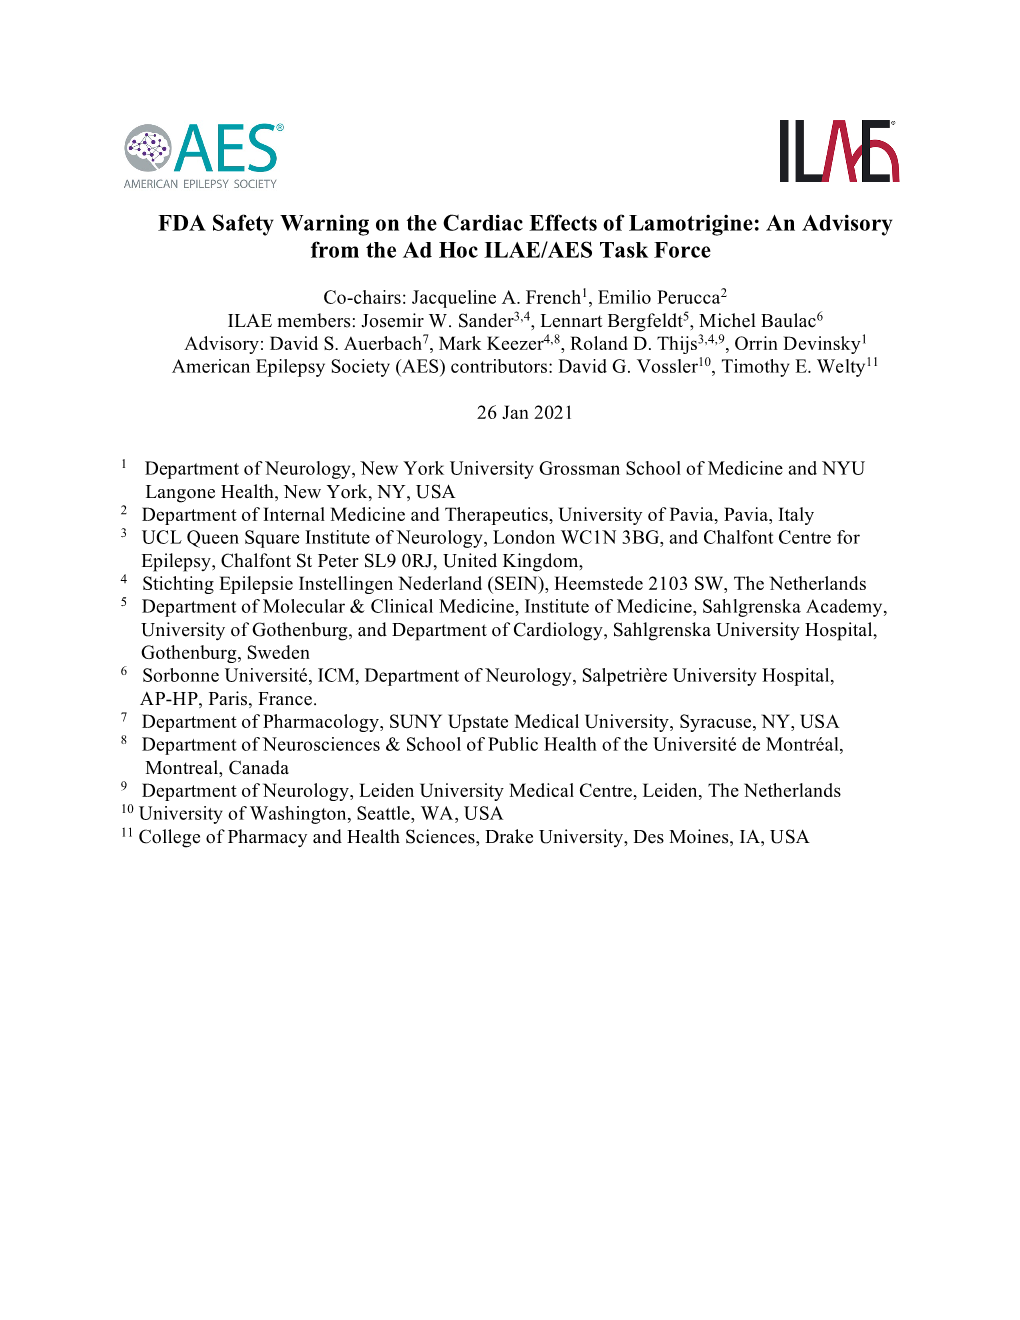 FDA Safety Warning on the Cardiac Effects of Lamotrigine: an Advisory from the Ad Hoc ILAE/AES Task Force